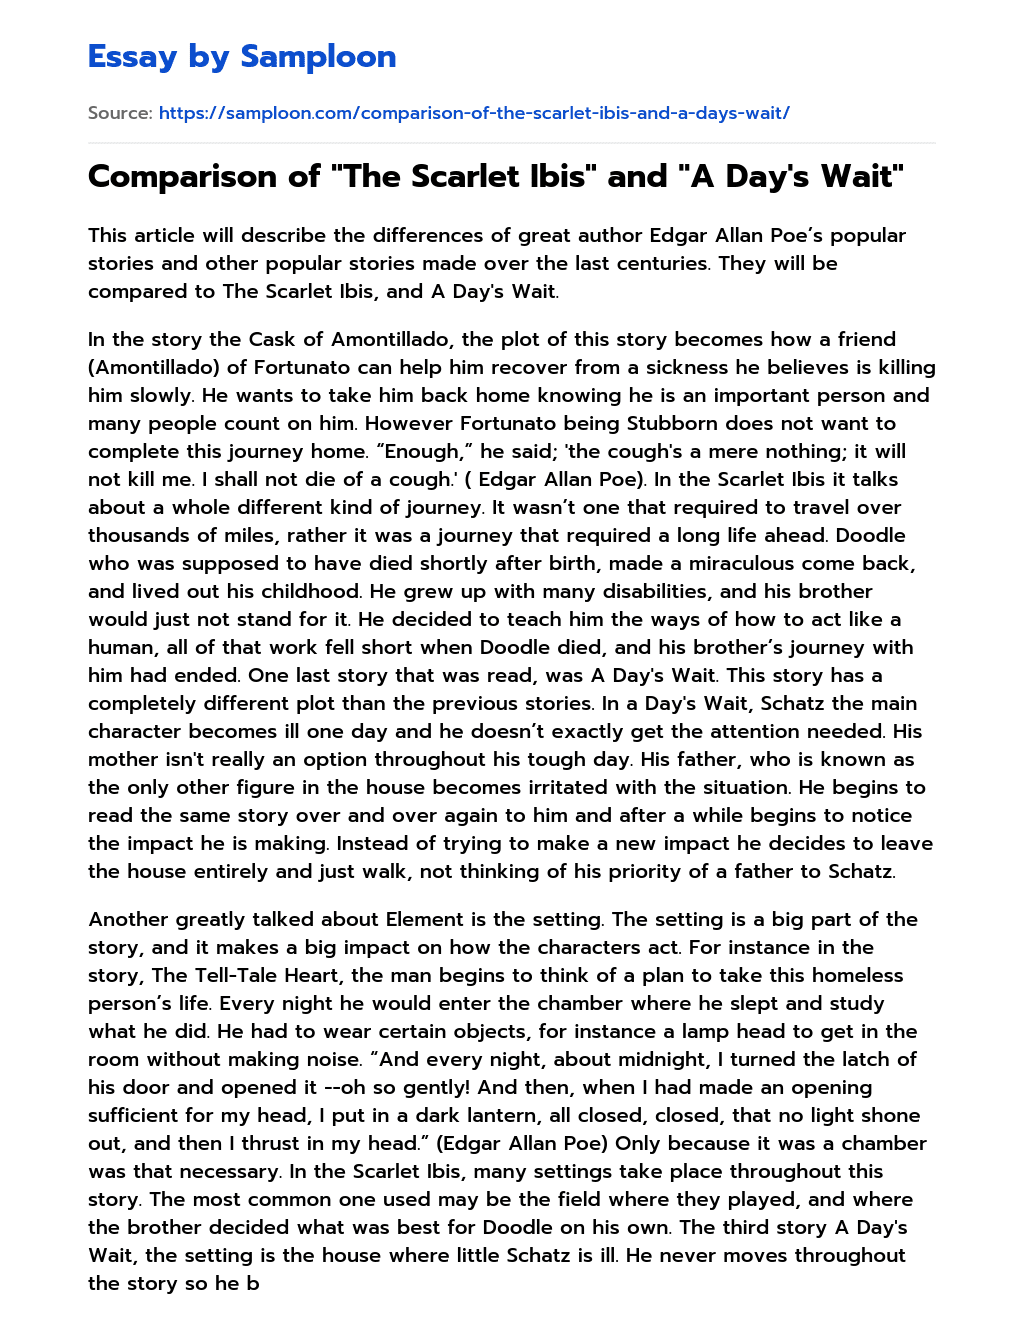 Comparison of “The Scarlet Ibis” and “A Day’s Wait” Summary essay